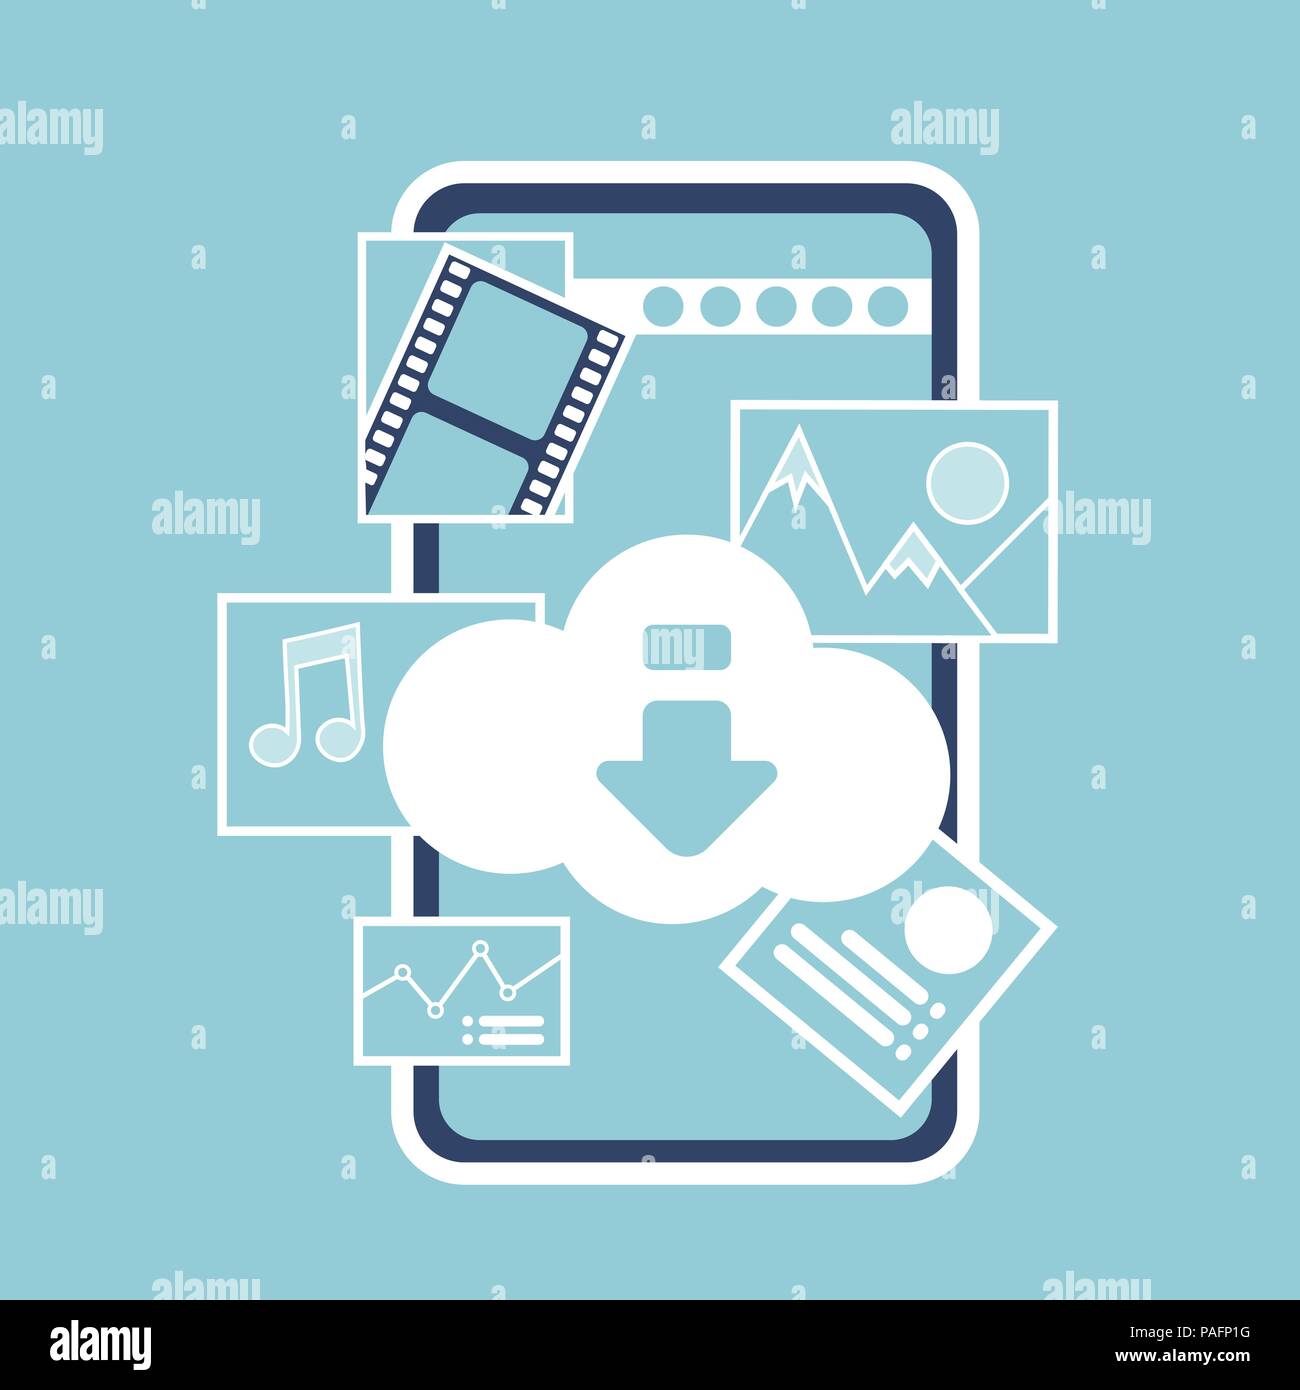 mobile online cloud synchronization application interface digital media music image online concept for design work and animation flat Stock Vector